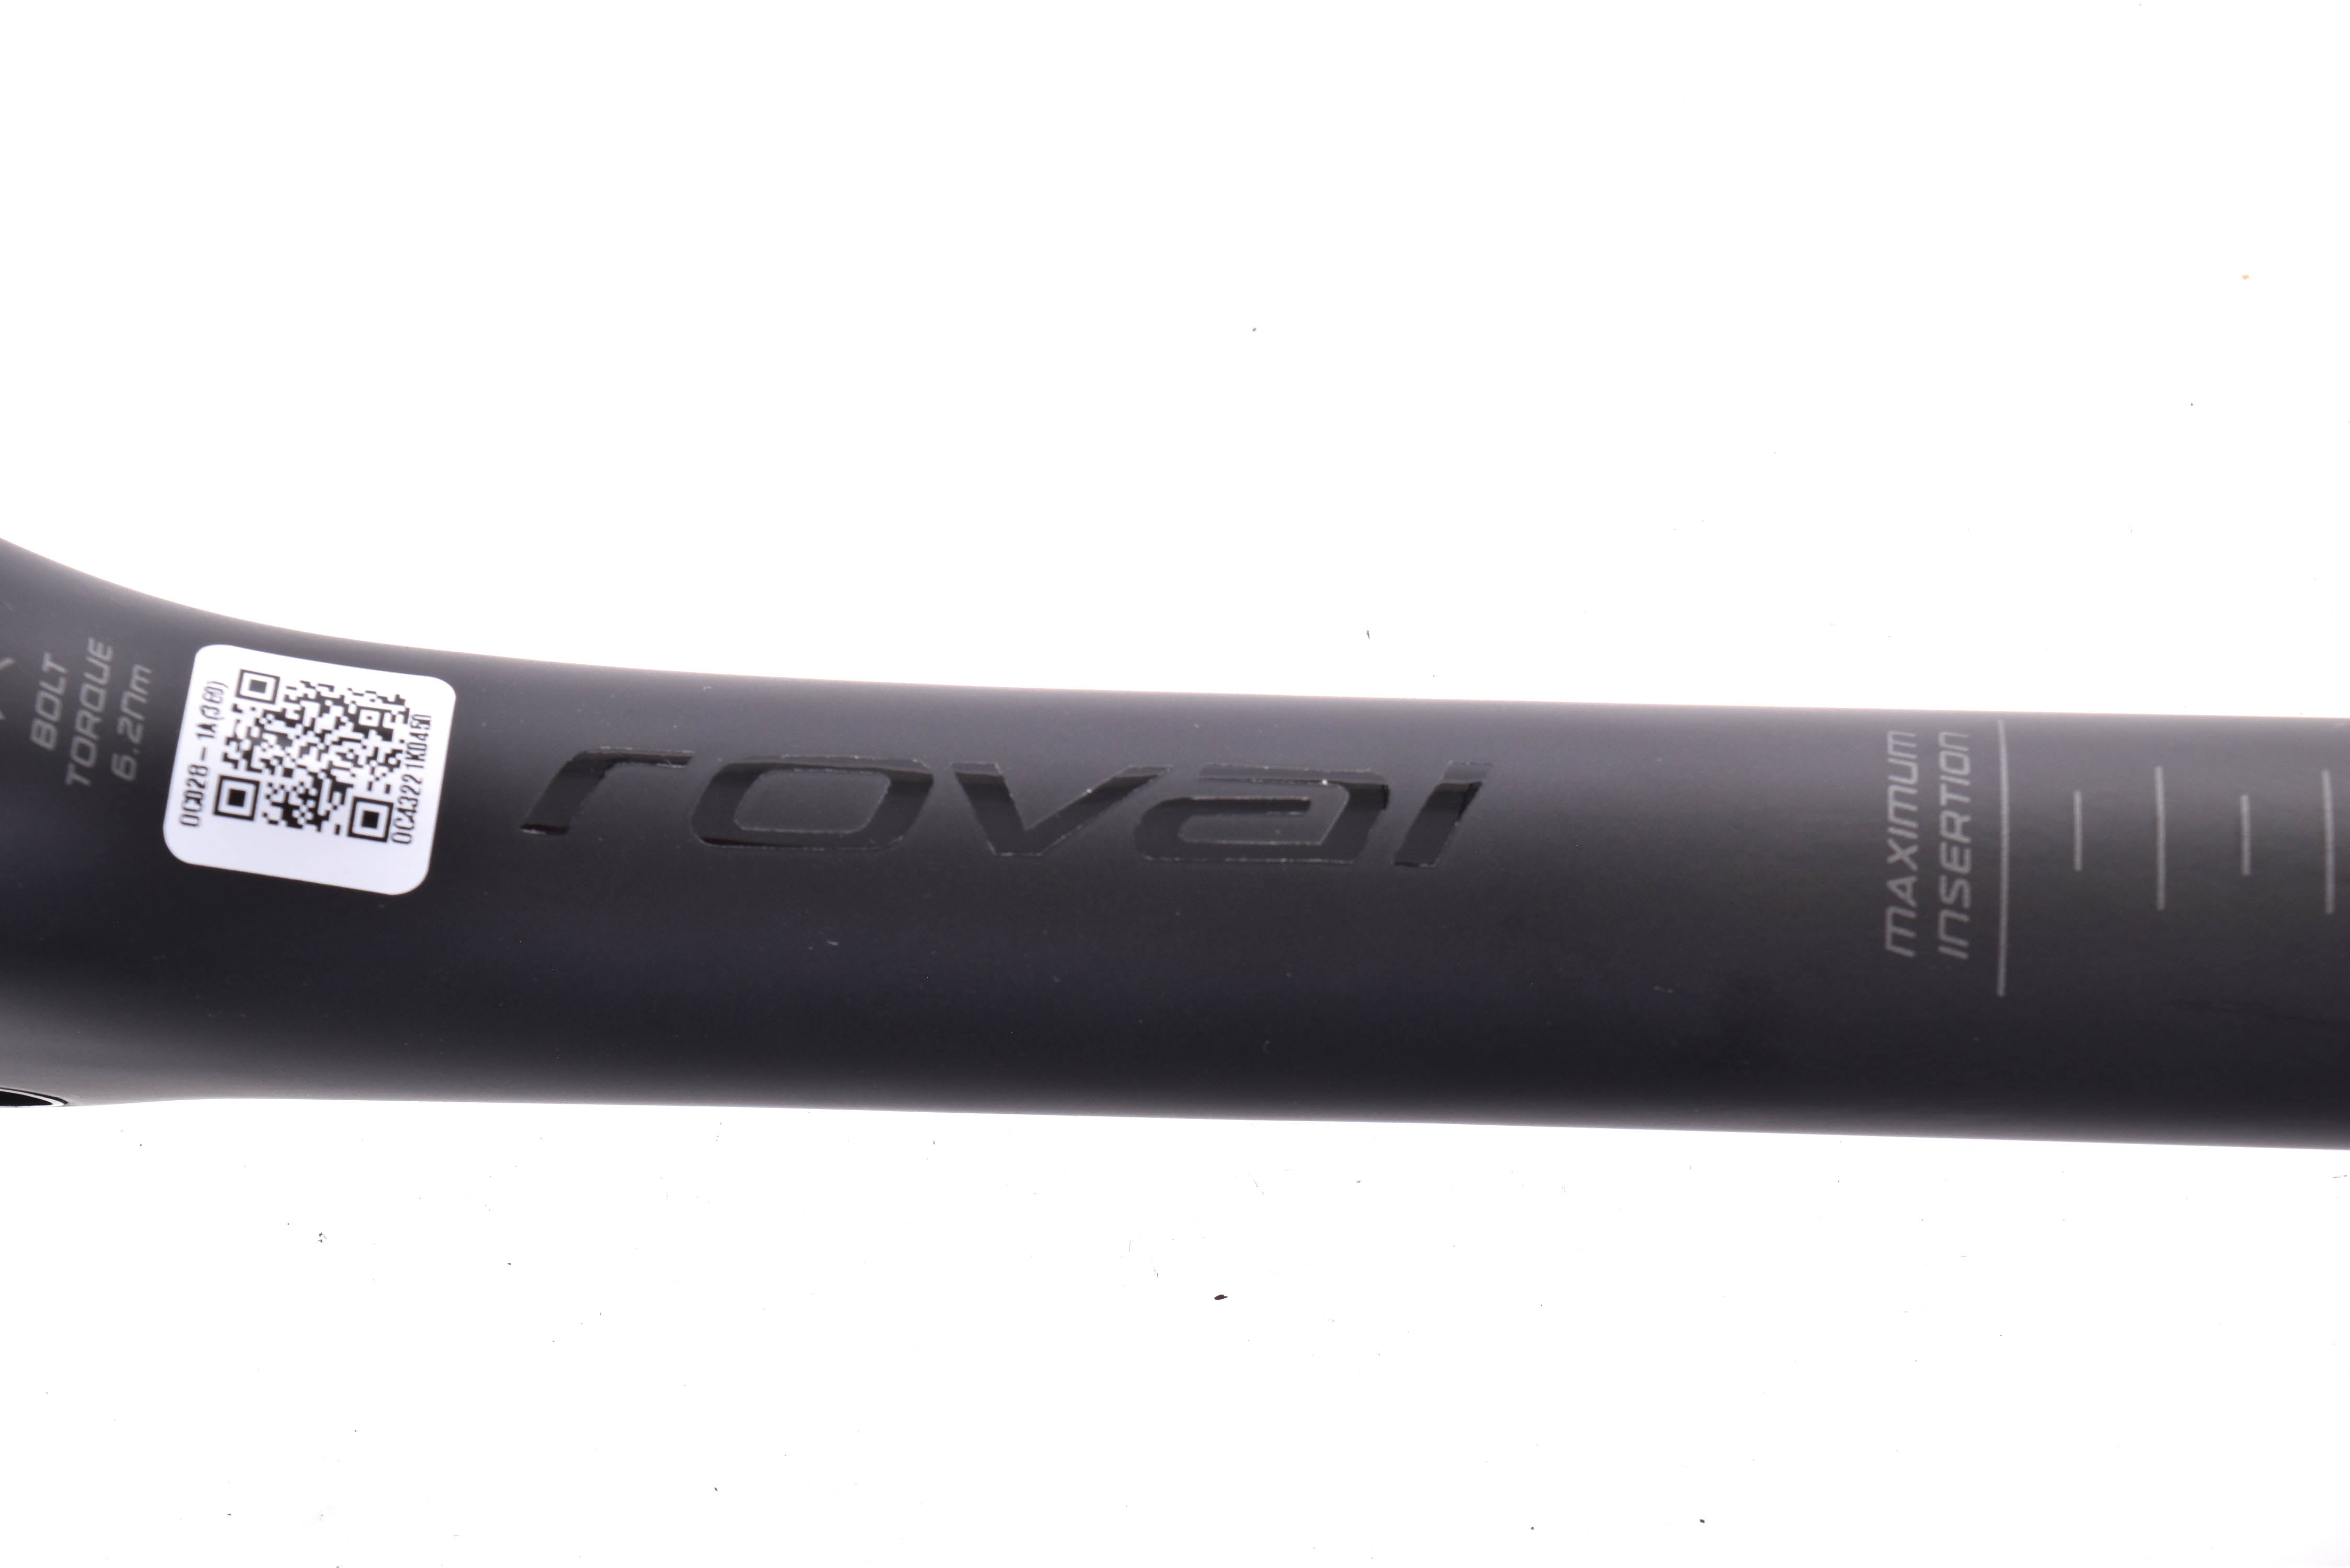 NEW (out of box) Roval Alpinist Seatpost 27.2mm Diameter Carbon 360mm Length